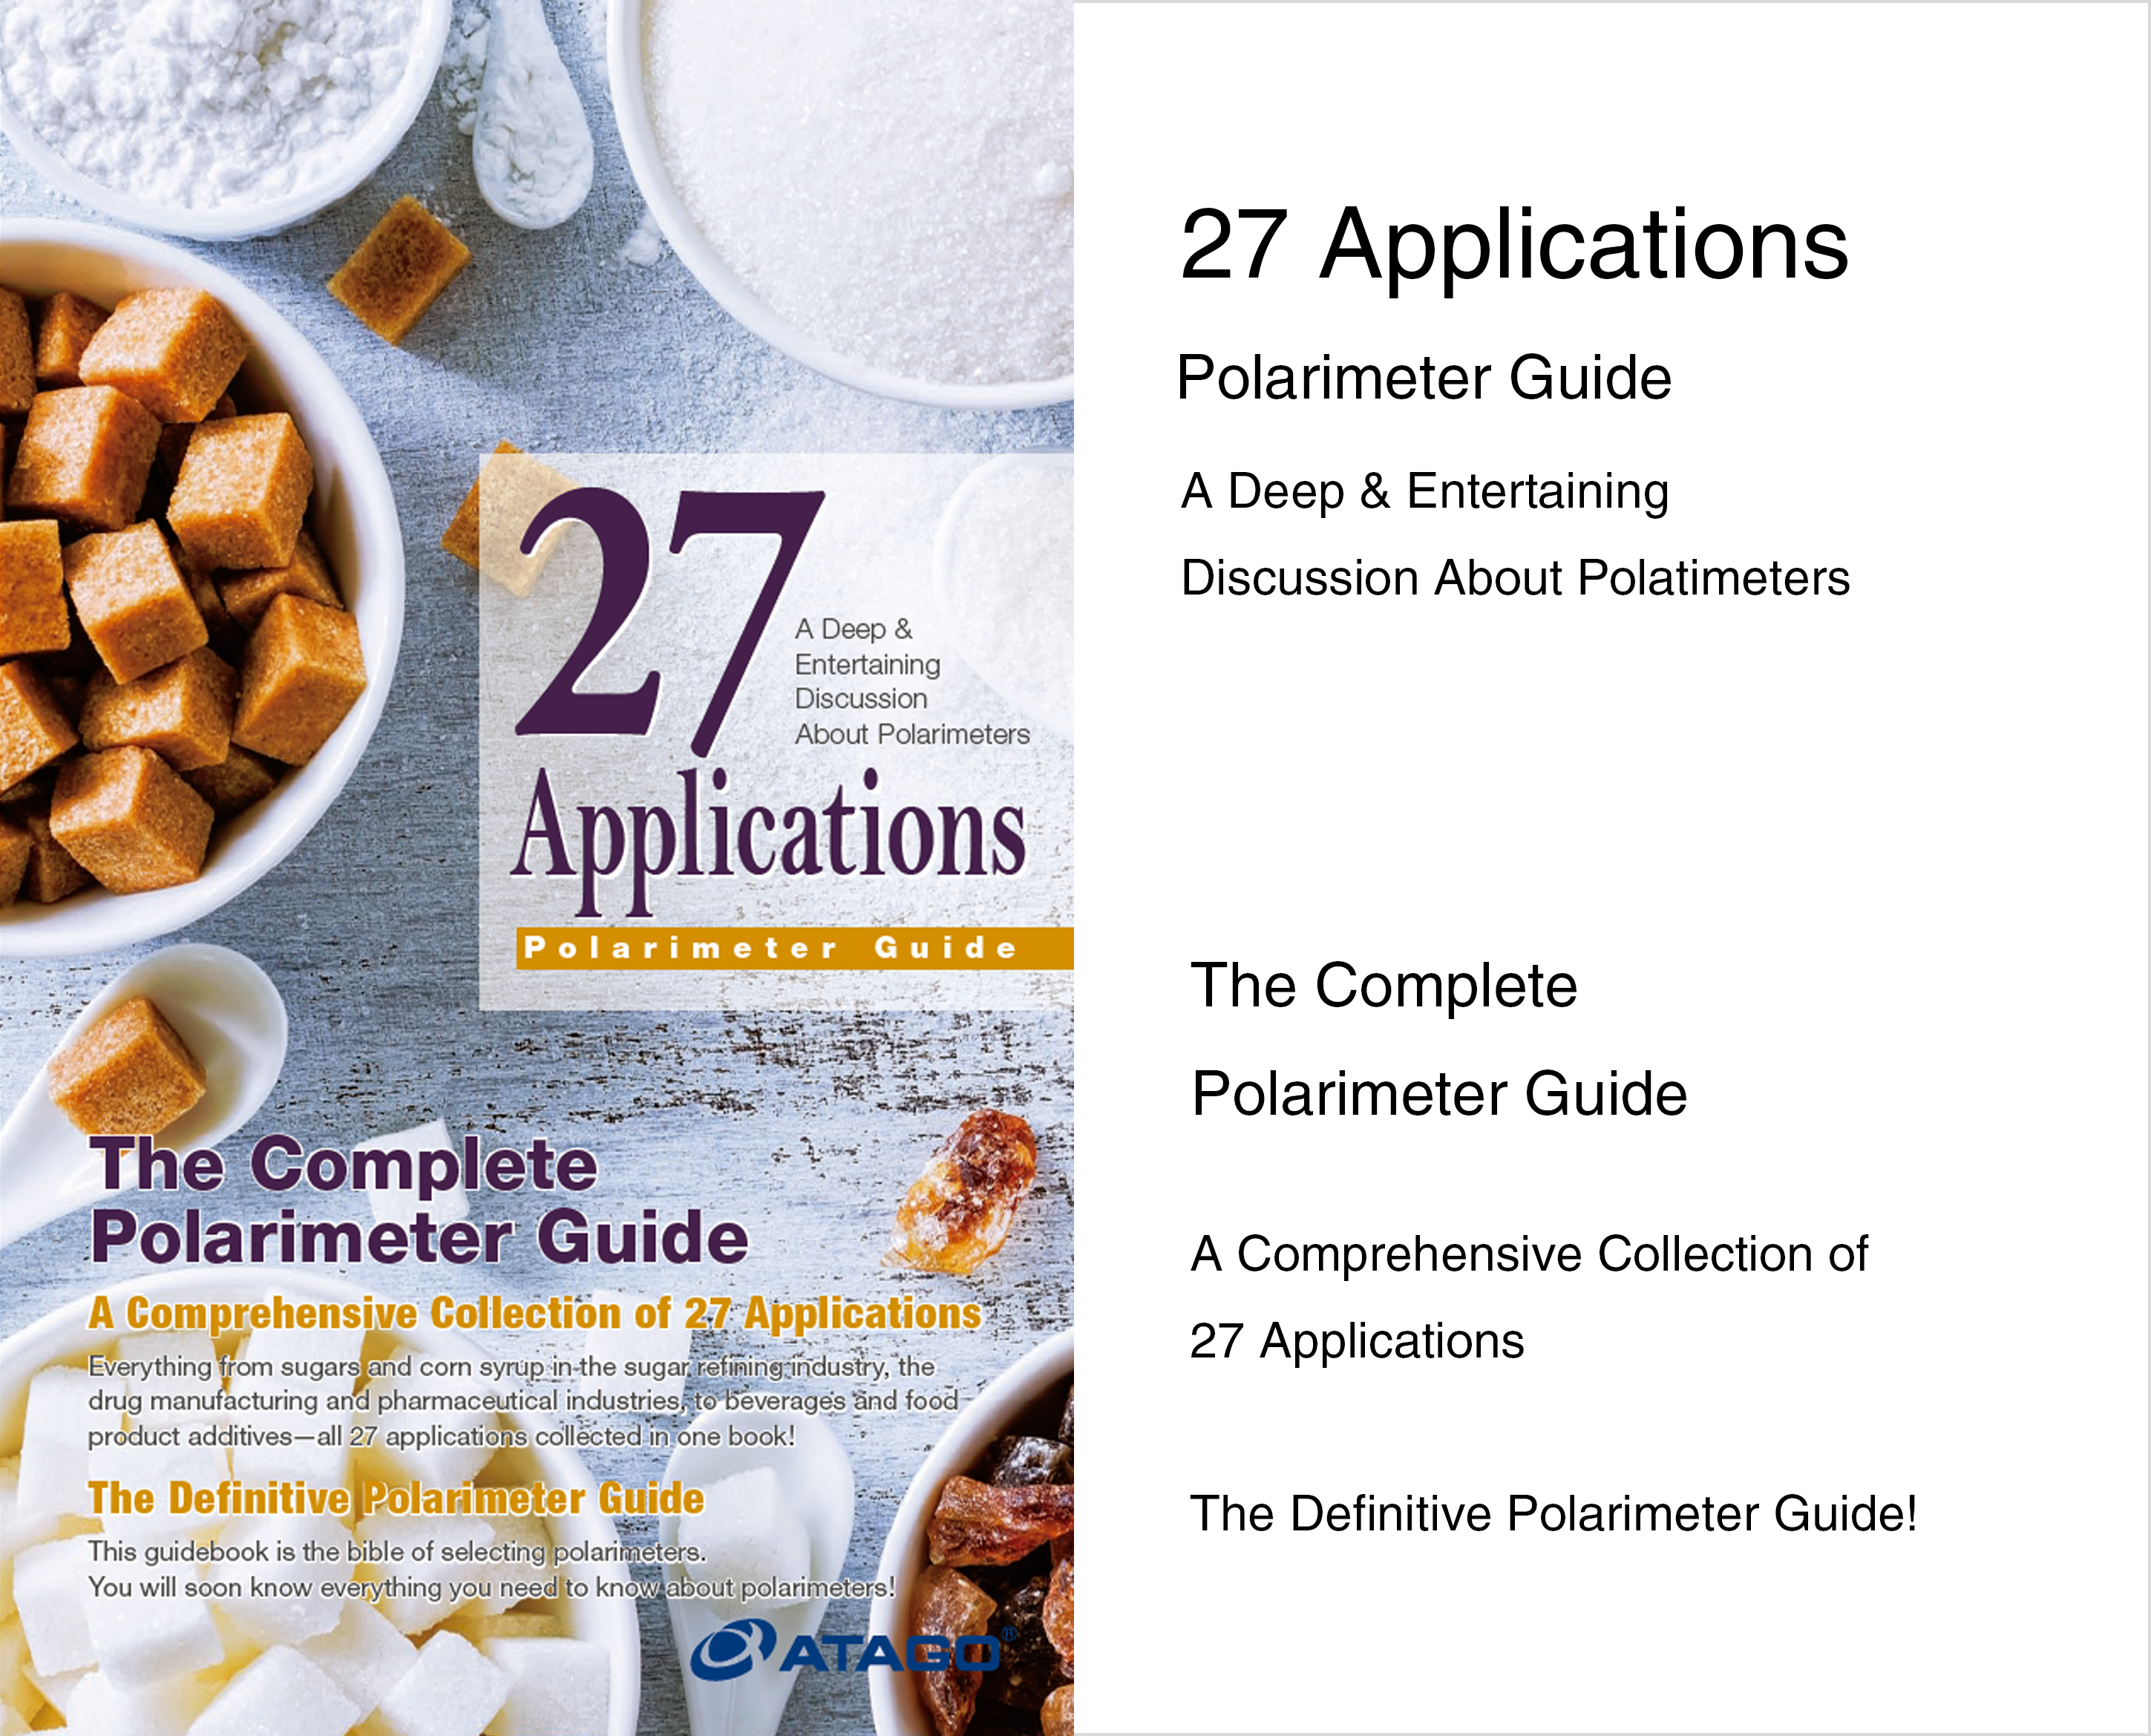 27 Applications / The Complete Polarimeter Guide!